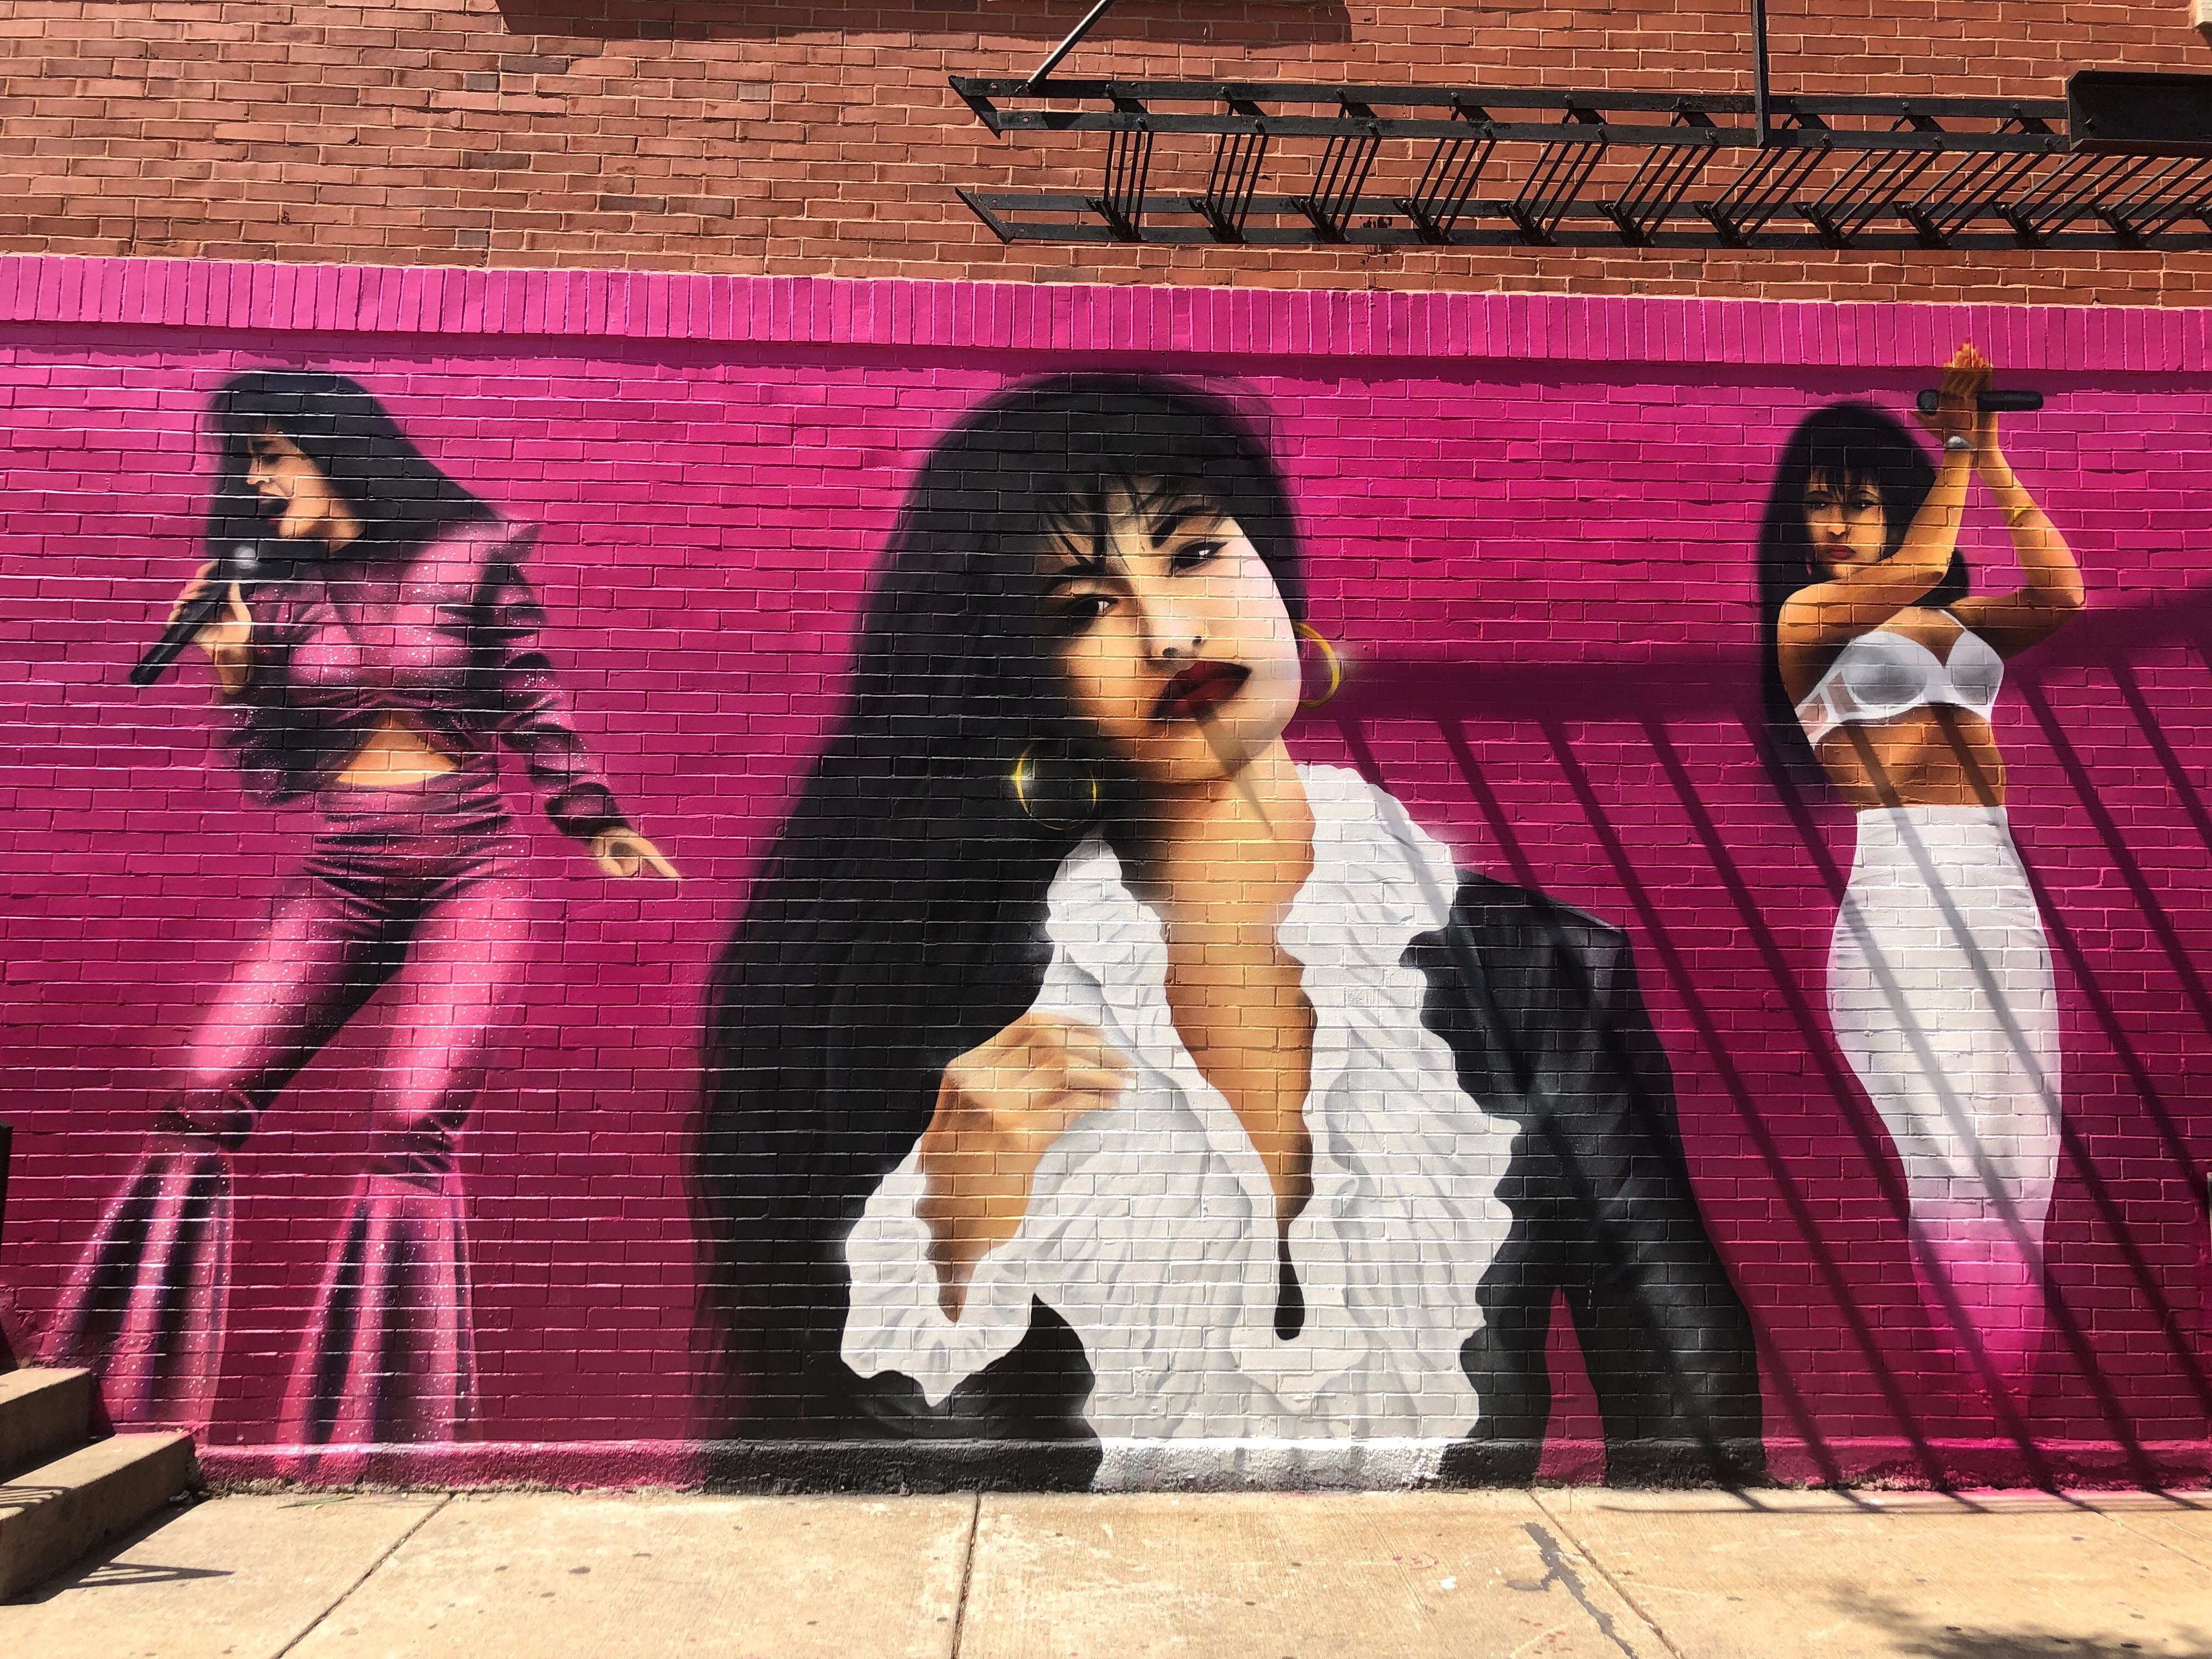 A New Selena Mural Is Drawing People Into A Local Corner Store In